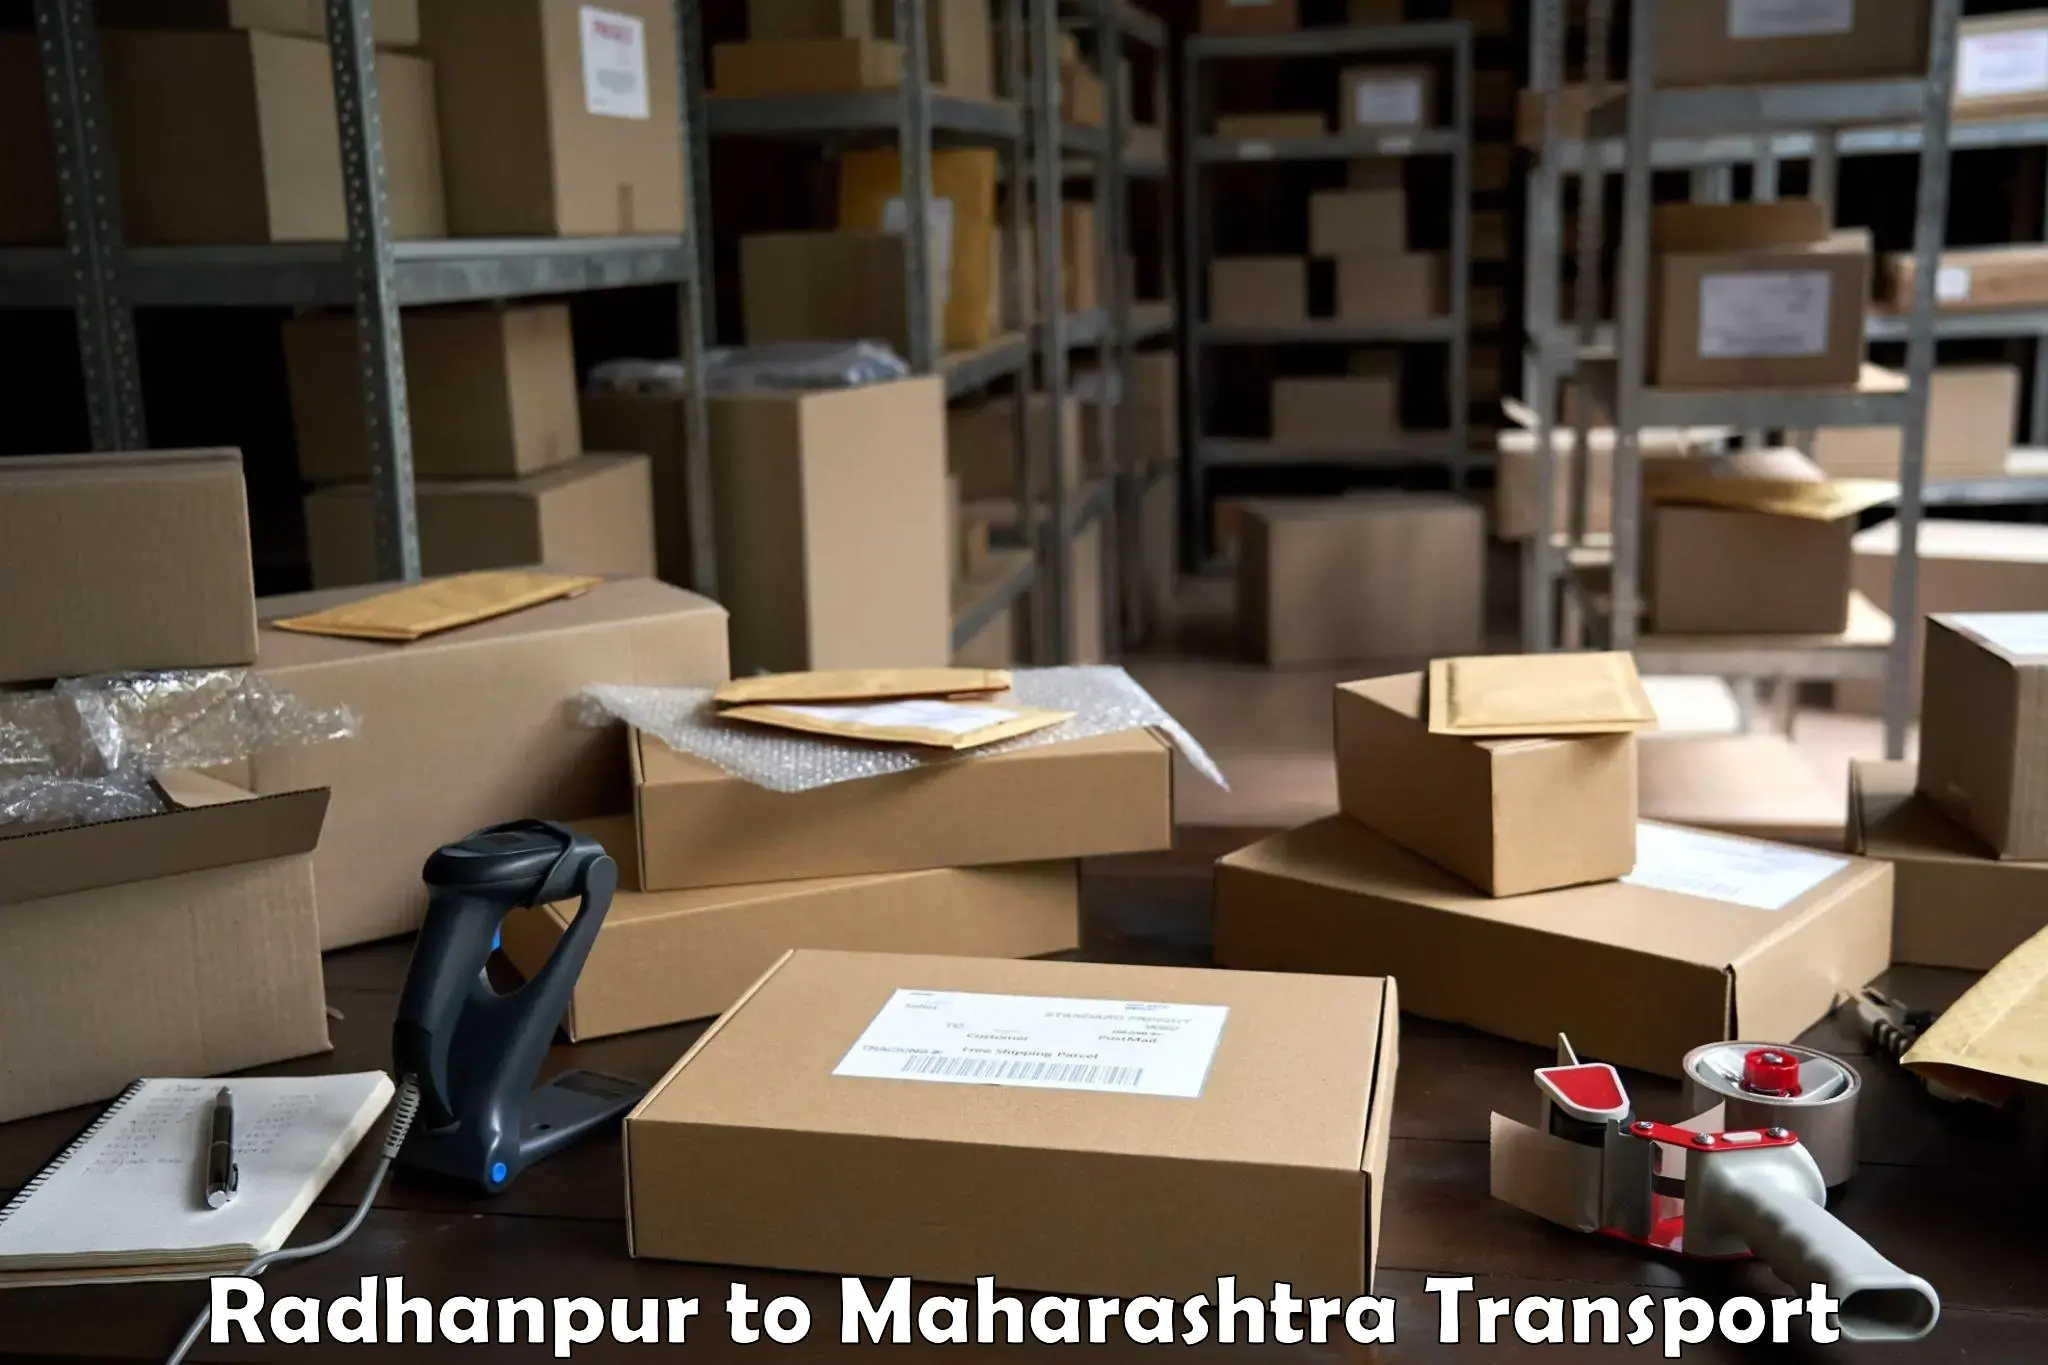 Daily parcel service transport Radhanpur to Virar